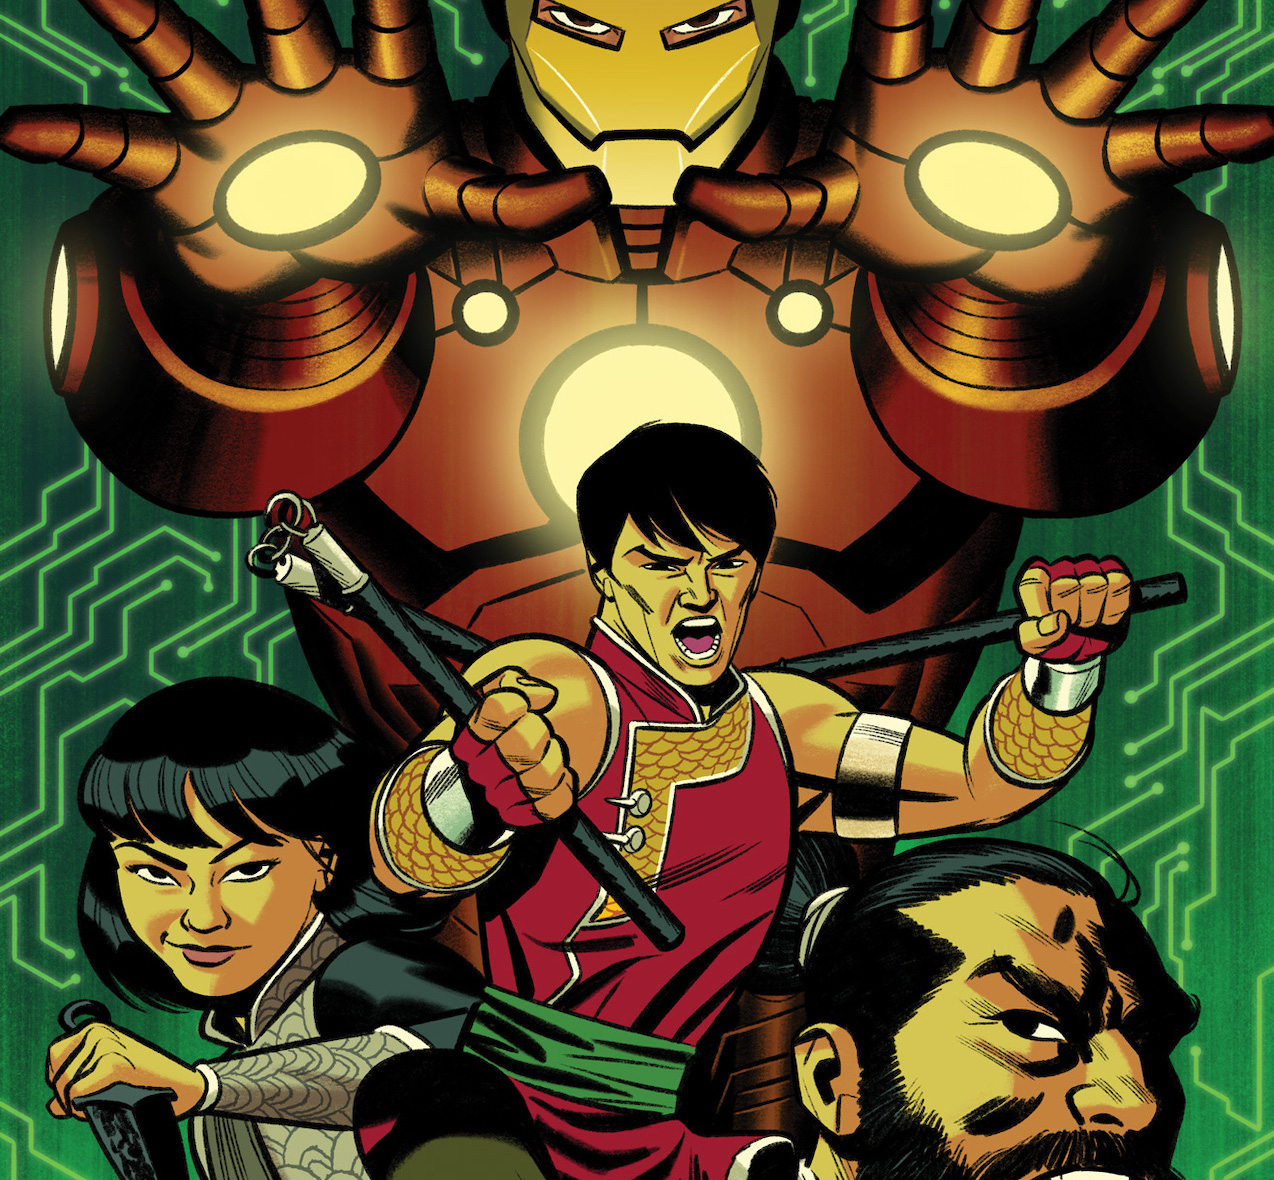 Marvel's 'Shang-Chi' #3 and #4 sells out plus Marvel reveals 'Shang-Chi' #5 preview